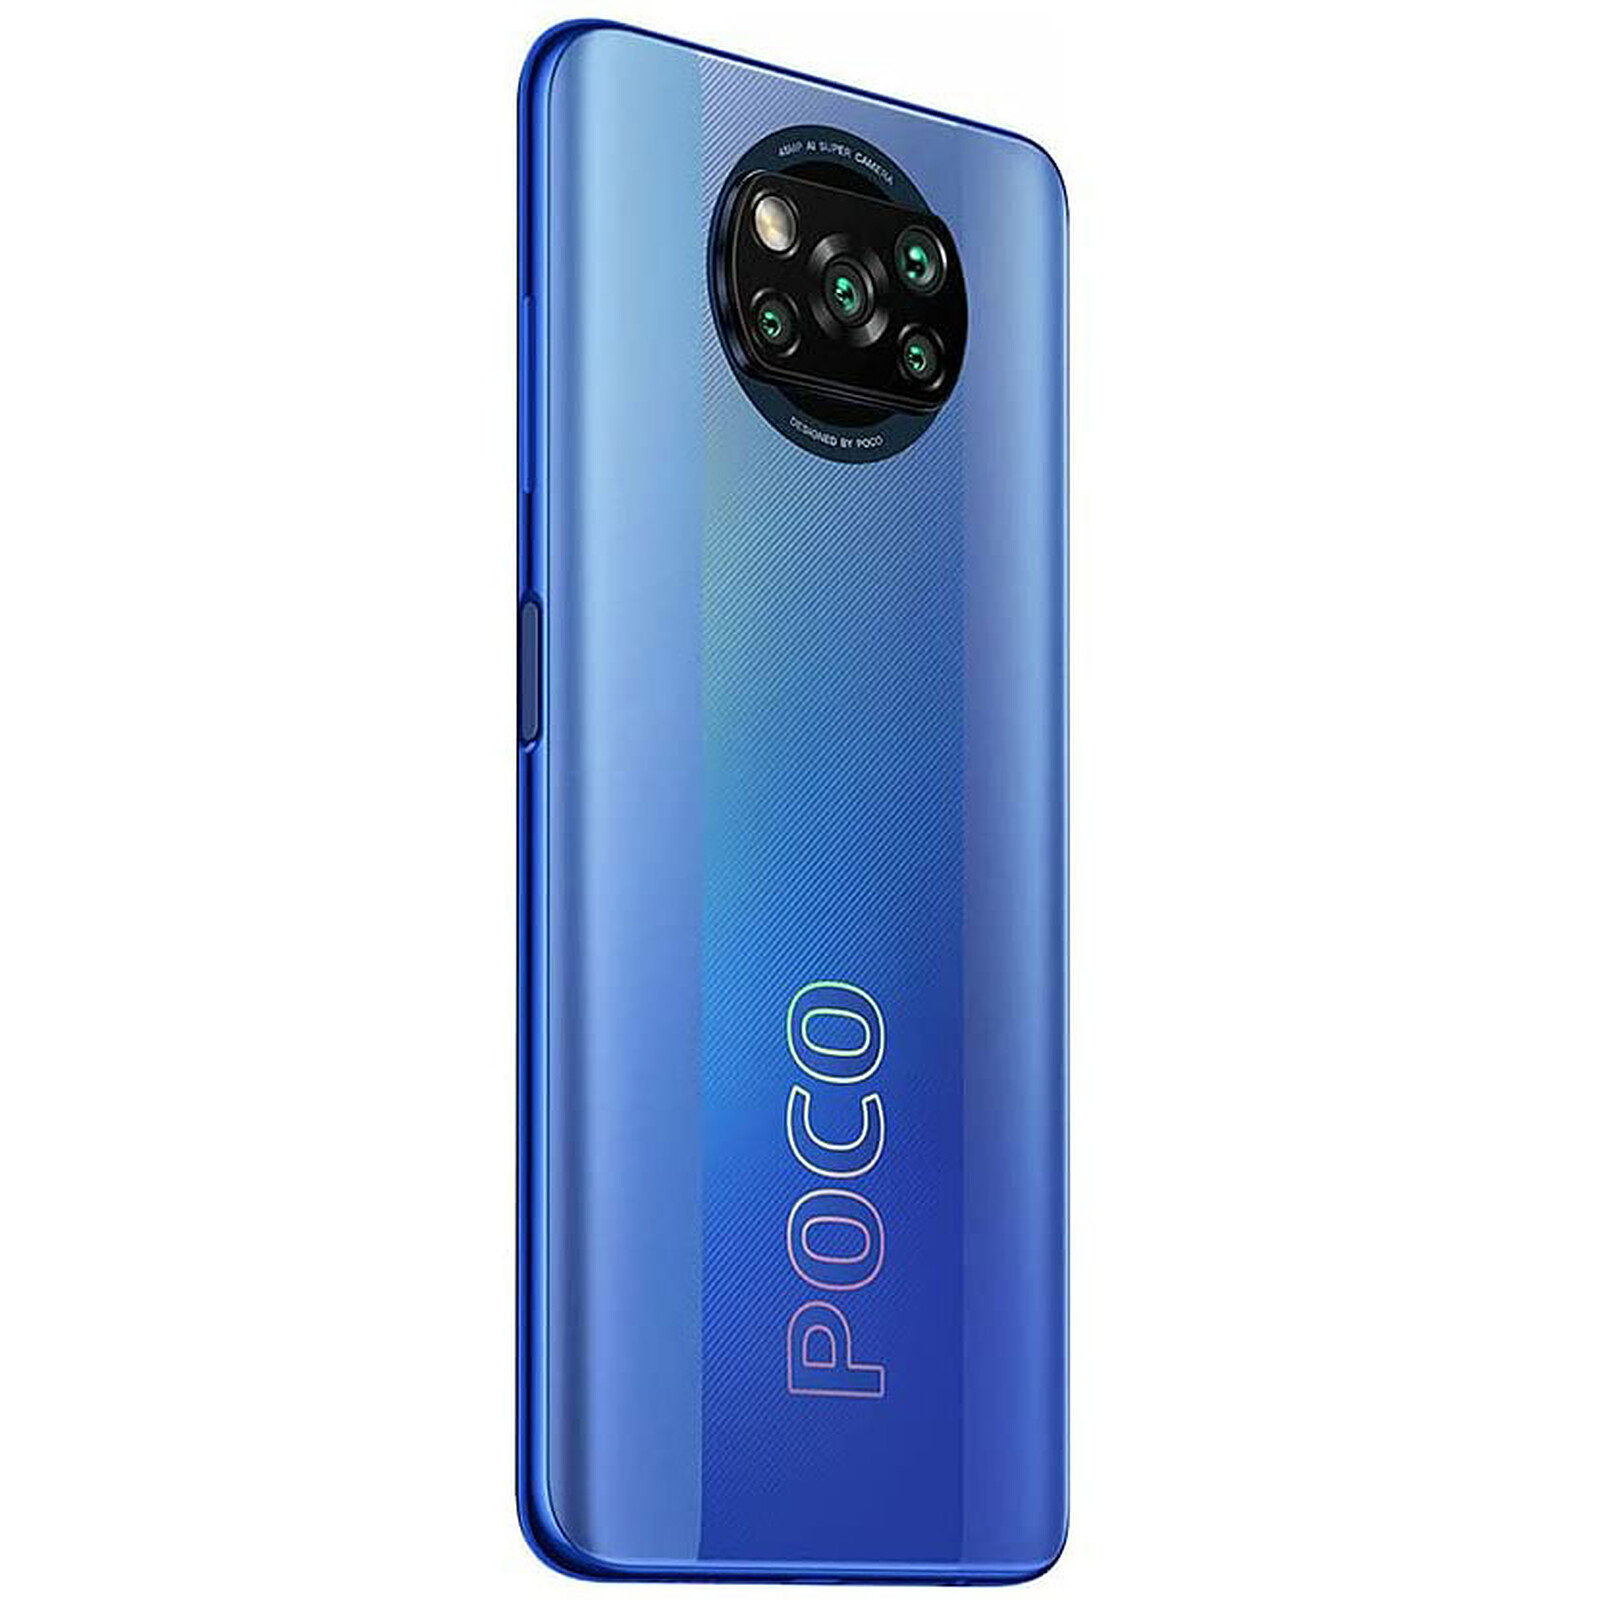 Xiaomi Poco X3 Pro Blue 8gb 256gb Mobile Phone And Smartphone Ldlc 3 Year Warranty Holy 6540